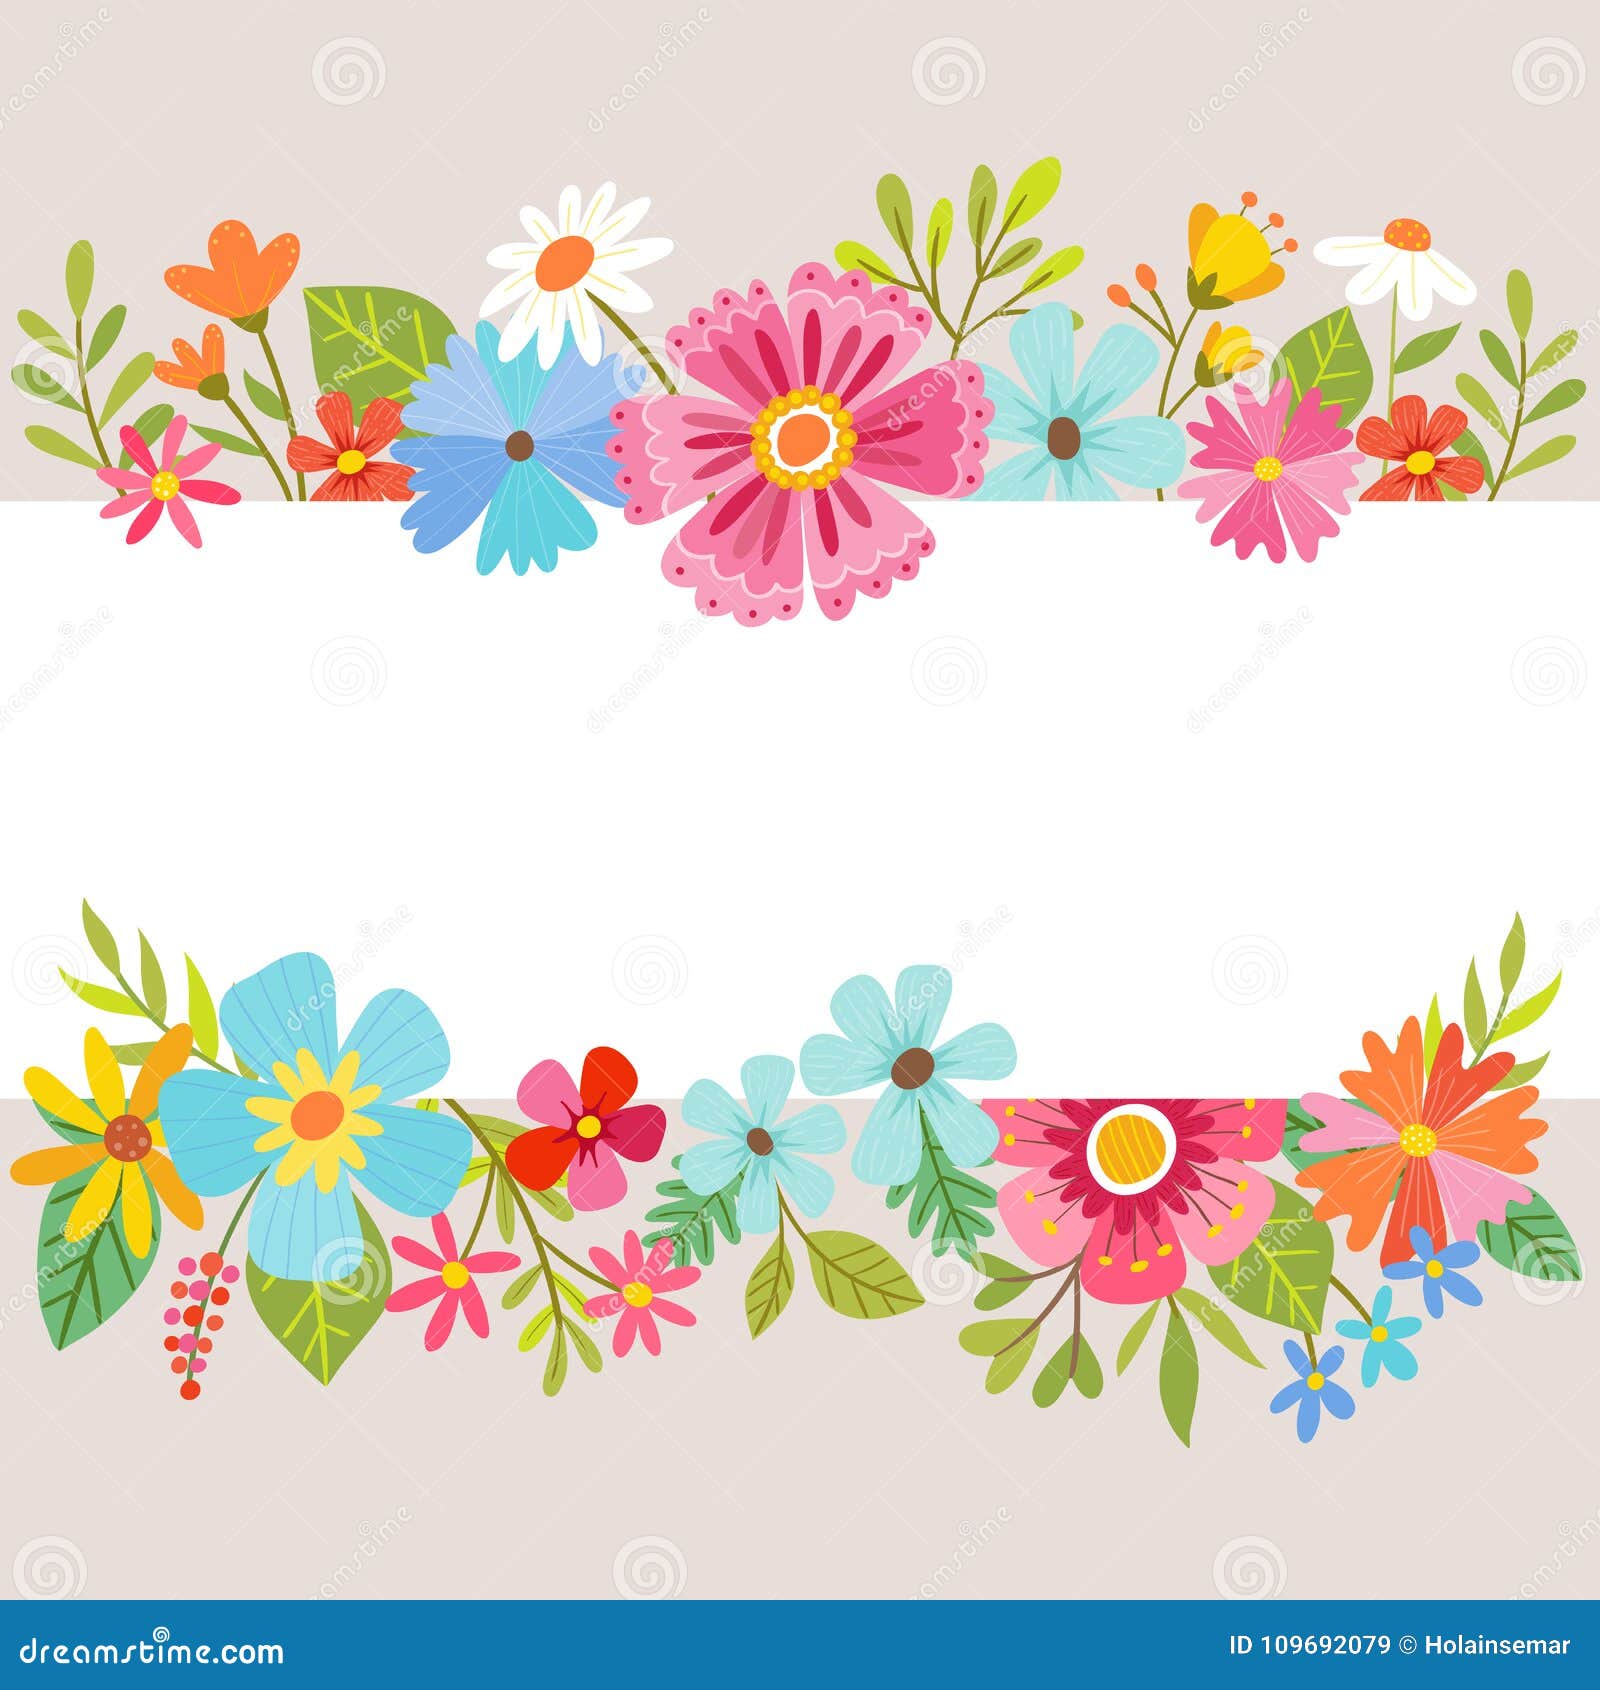 Spring Floral Background with Cartoon Flowers. Stock Vector ...